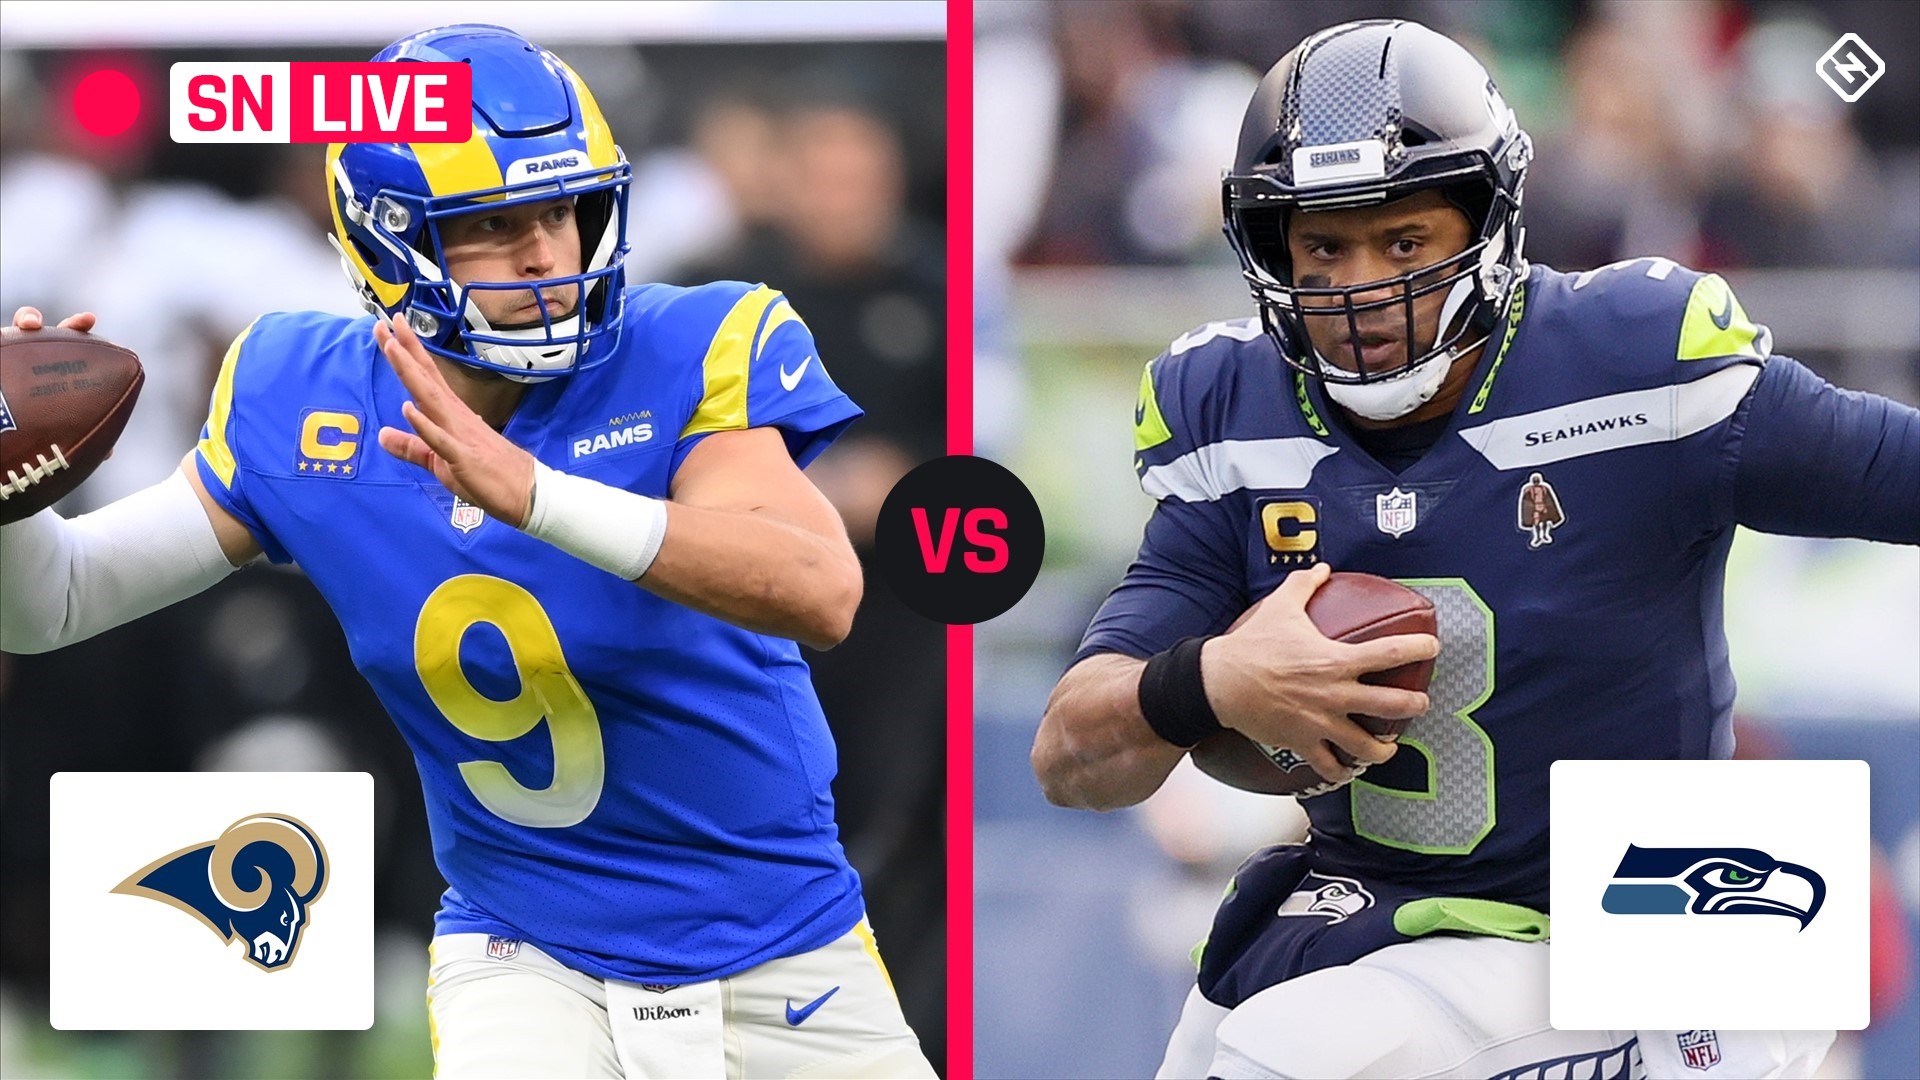 Rams vs Seahawks live score, updates, Tuesday night NFL game highlights